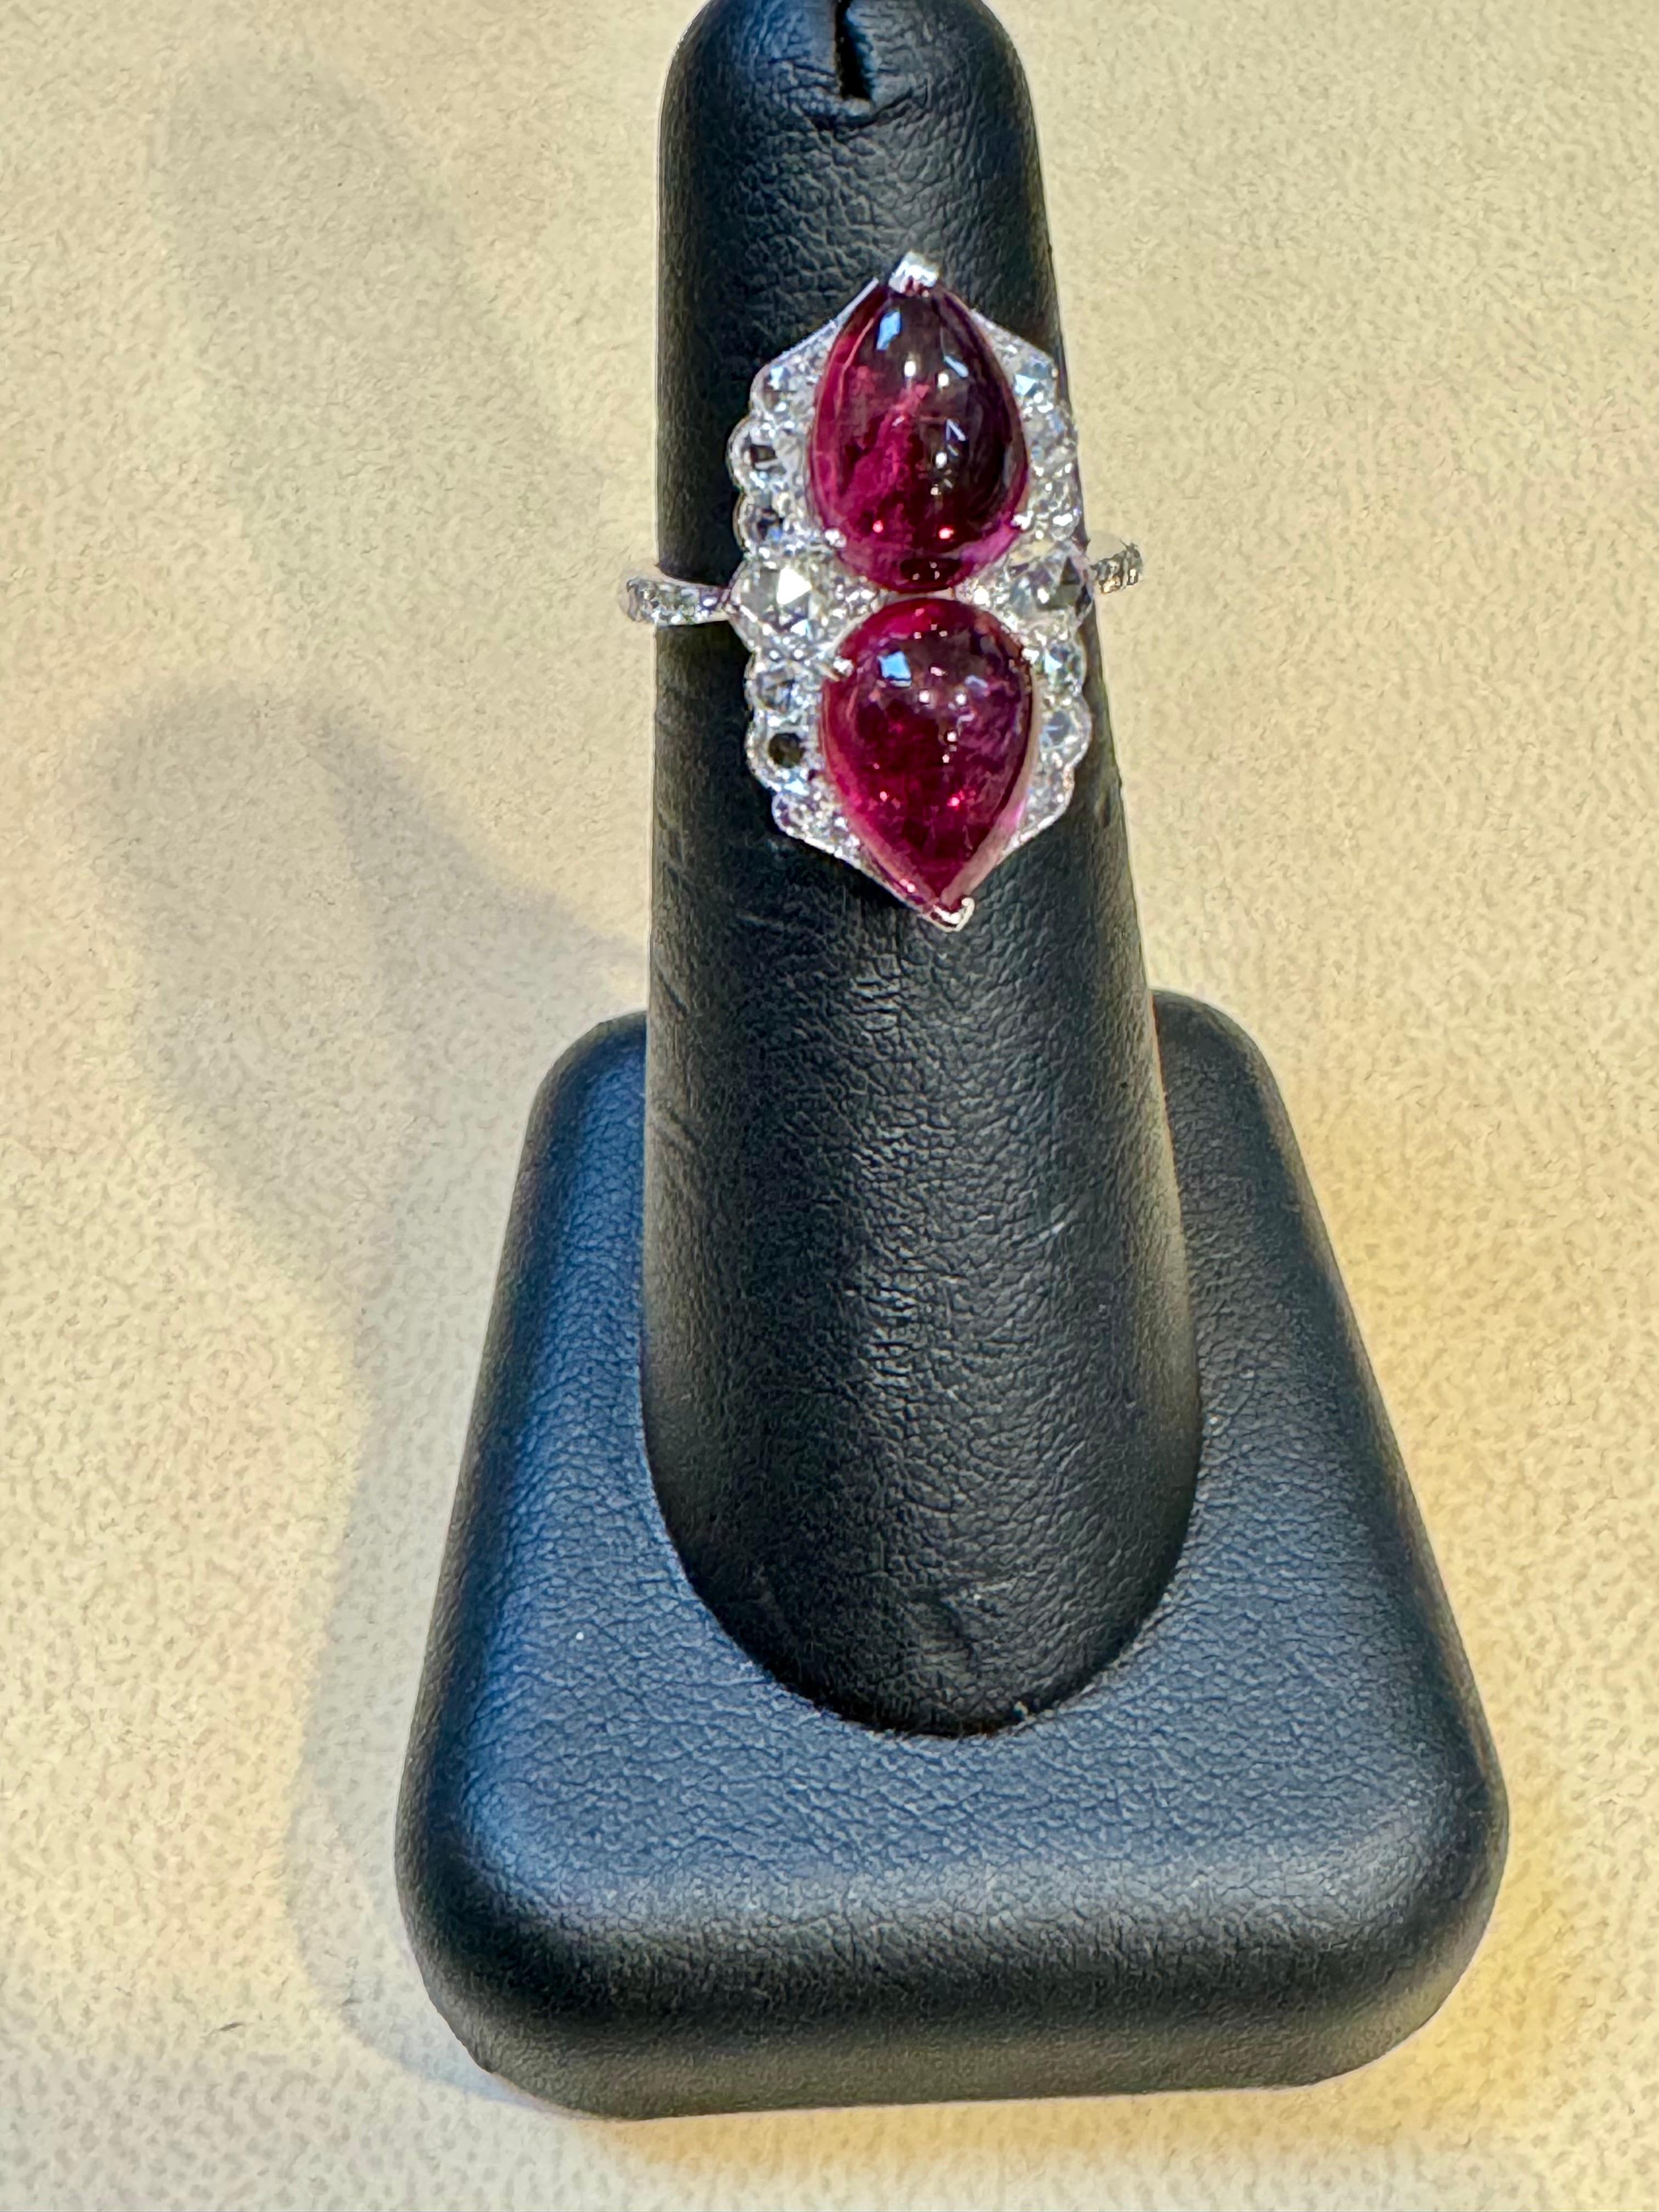 7 Ct Finest Rubelite Cabochon 1 Ct Diamond 18 Kt White Gold Cocktail Ring Size 6 For Sale 2